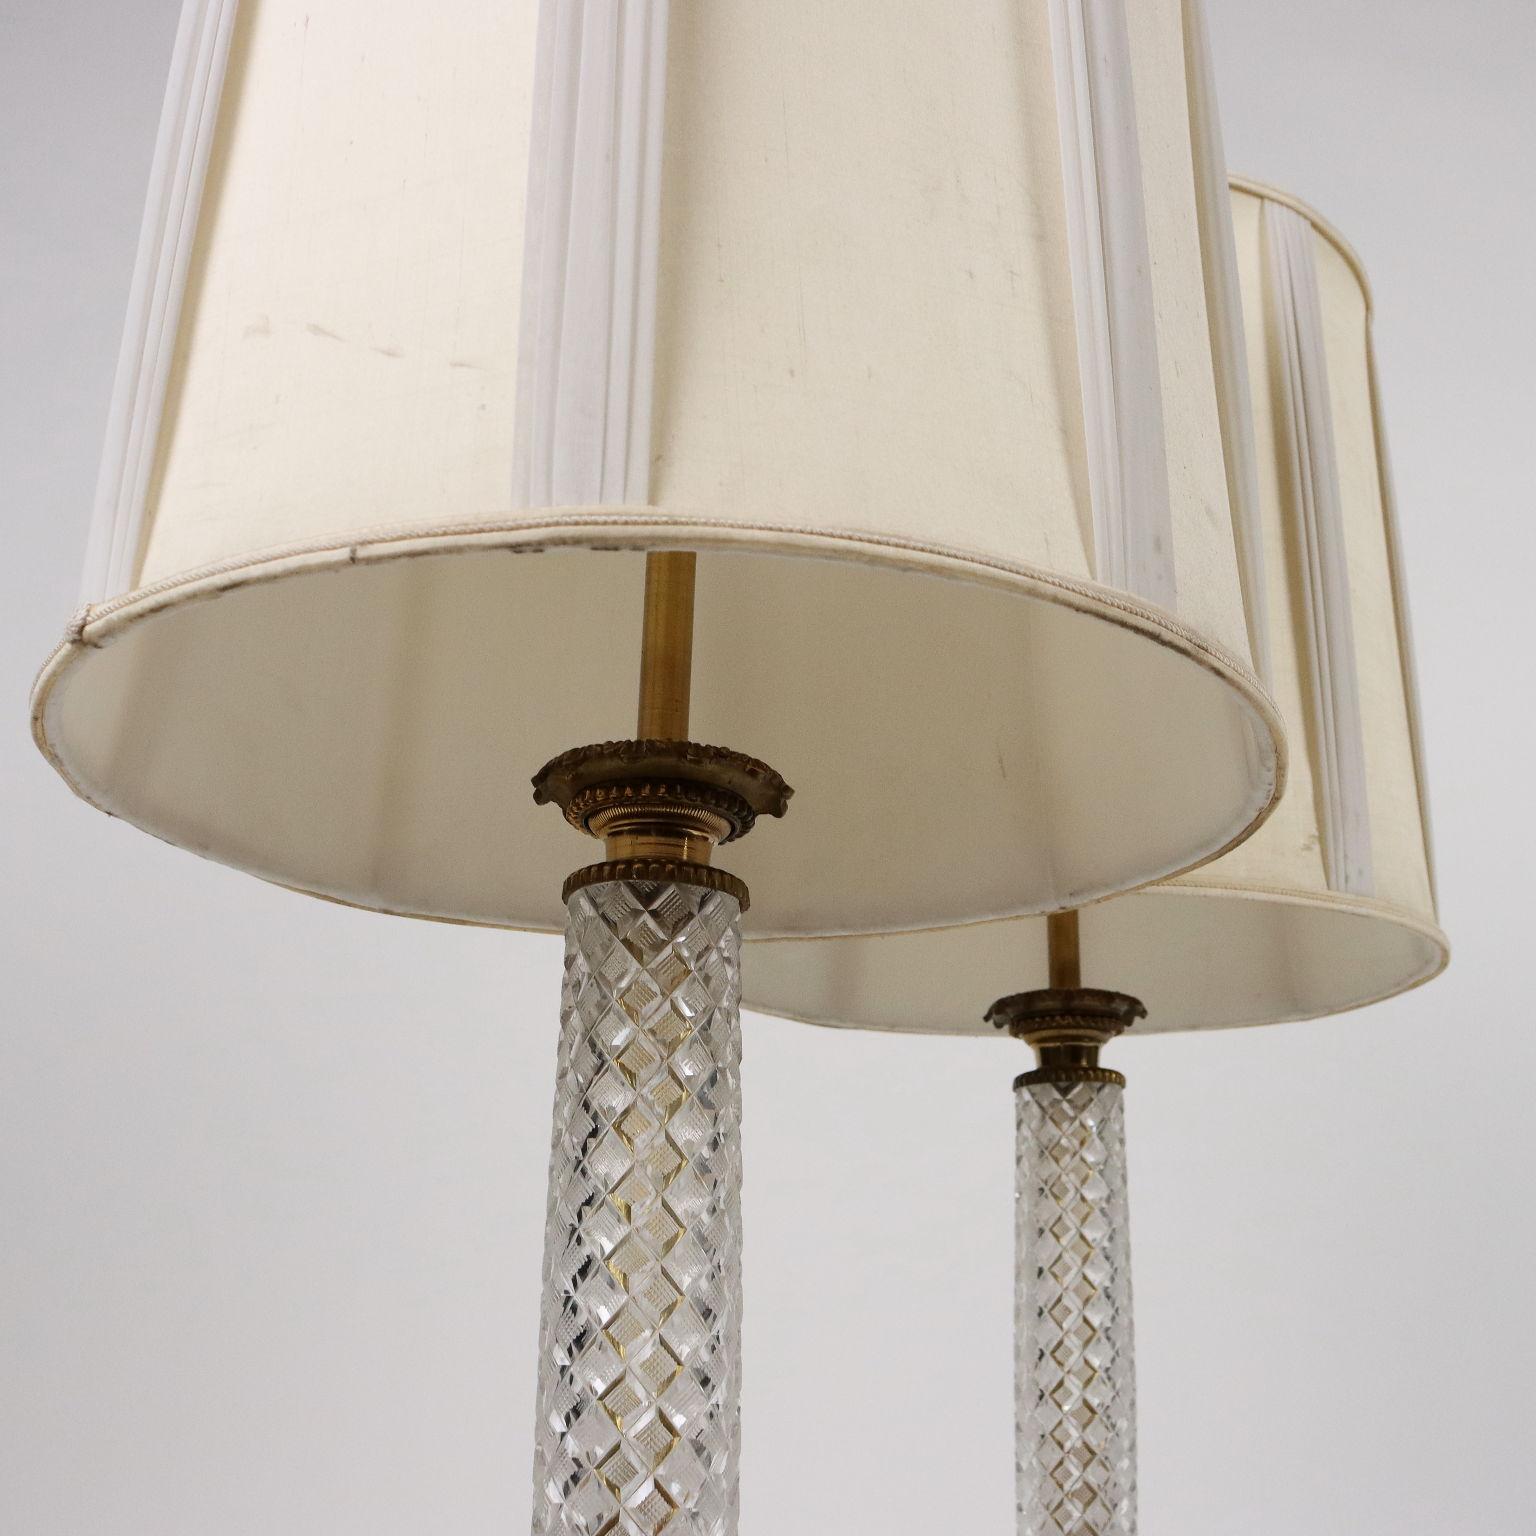 Mid-Century Modern Pair of Cristal and Bronze Paris Lamps, France, Mid 1900s For Sale